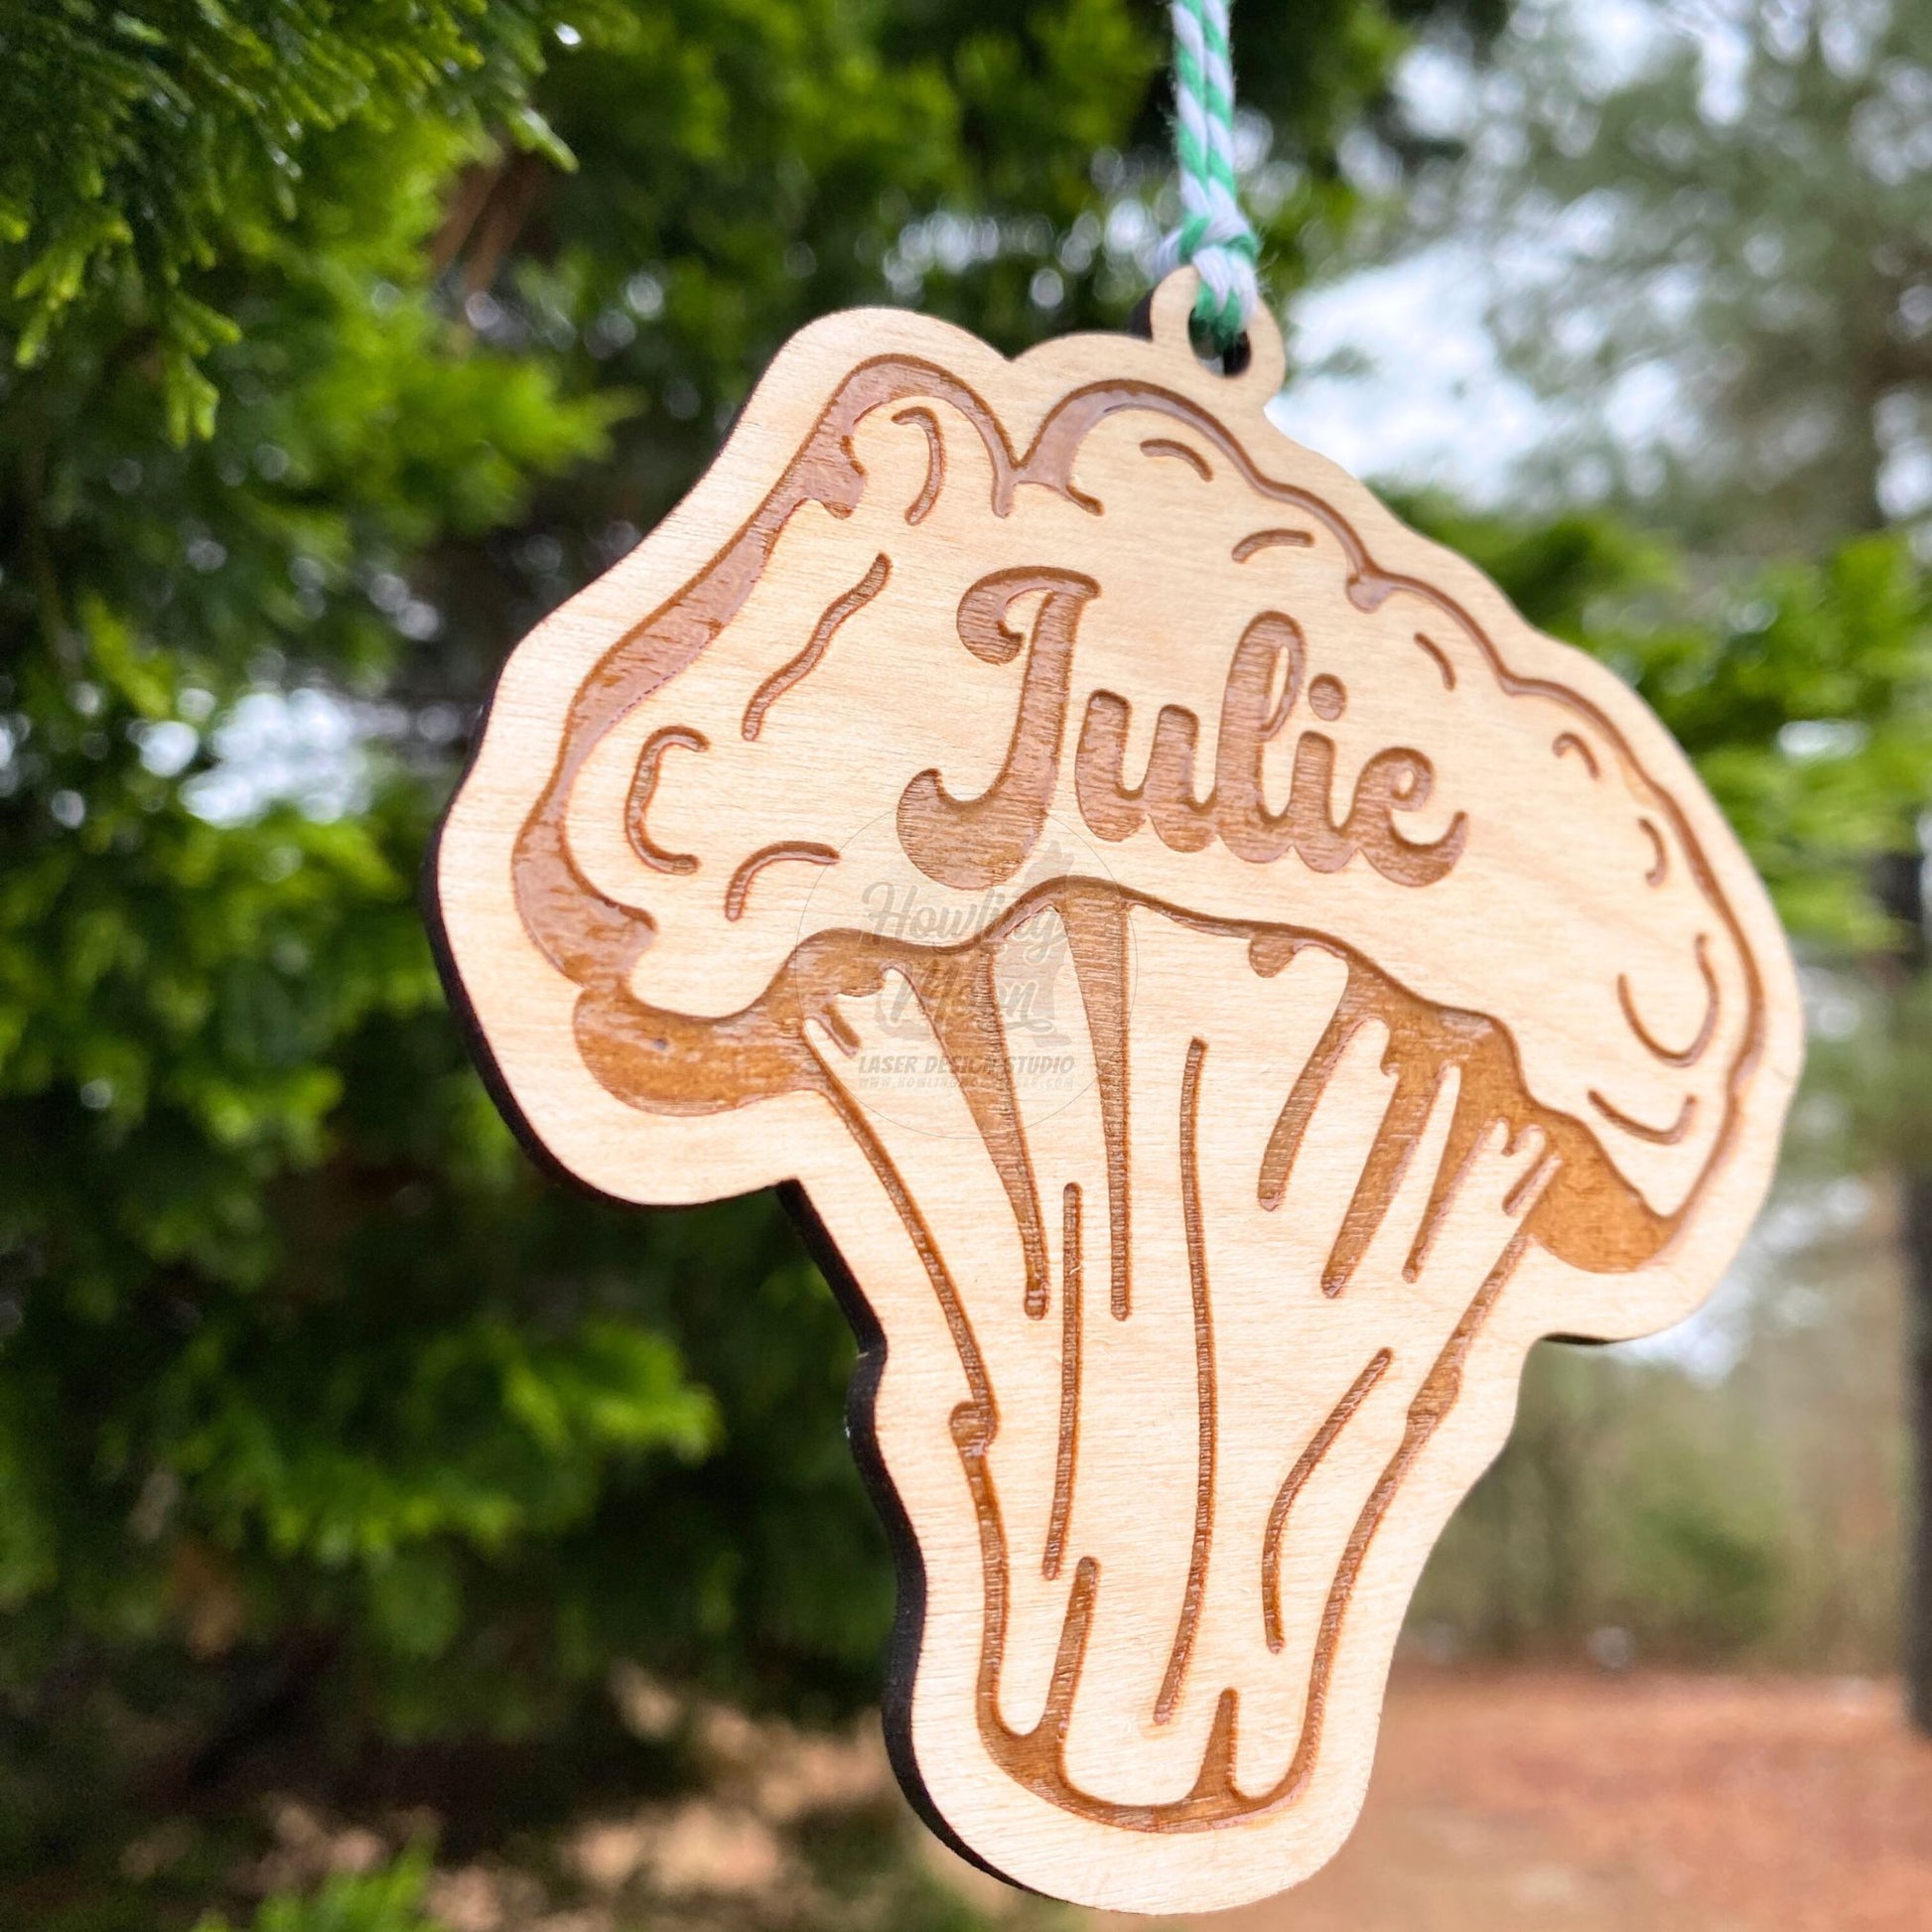 Left side view of Personalized broccoli ornament made of natural wood hanging from a tree - made by Howling Moon Laser Design Studio in Virginia, USA